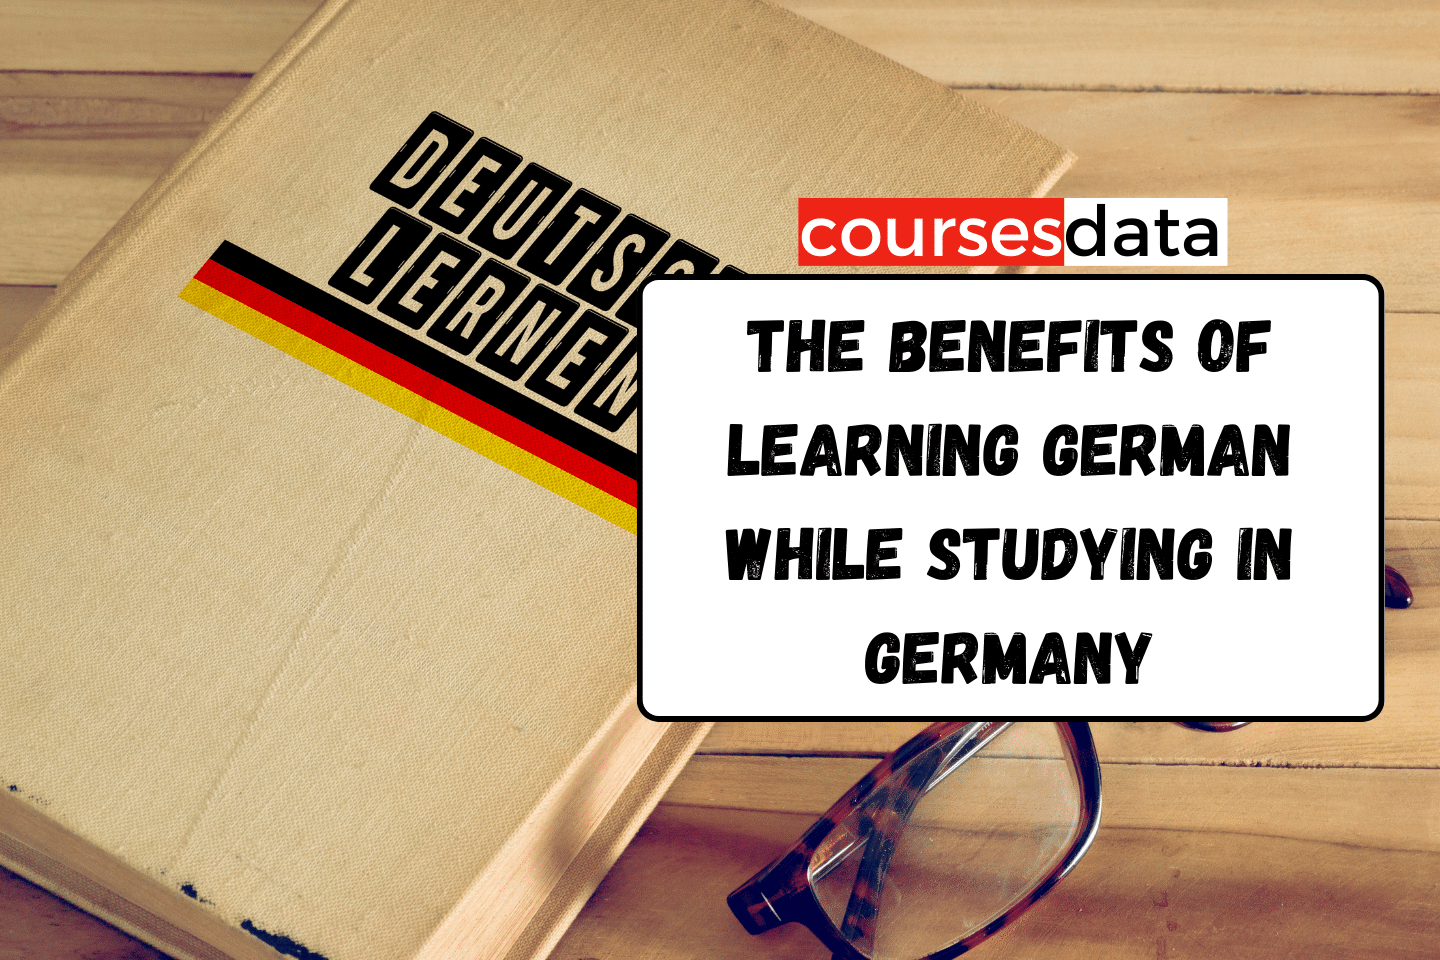 The Benefits of Learning German While Studying in Germany